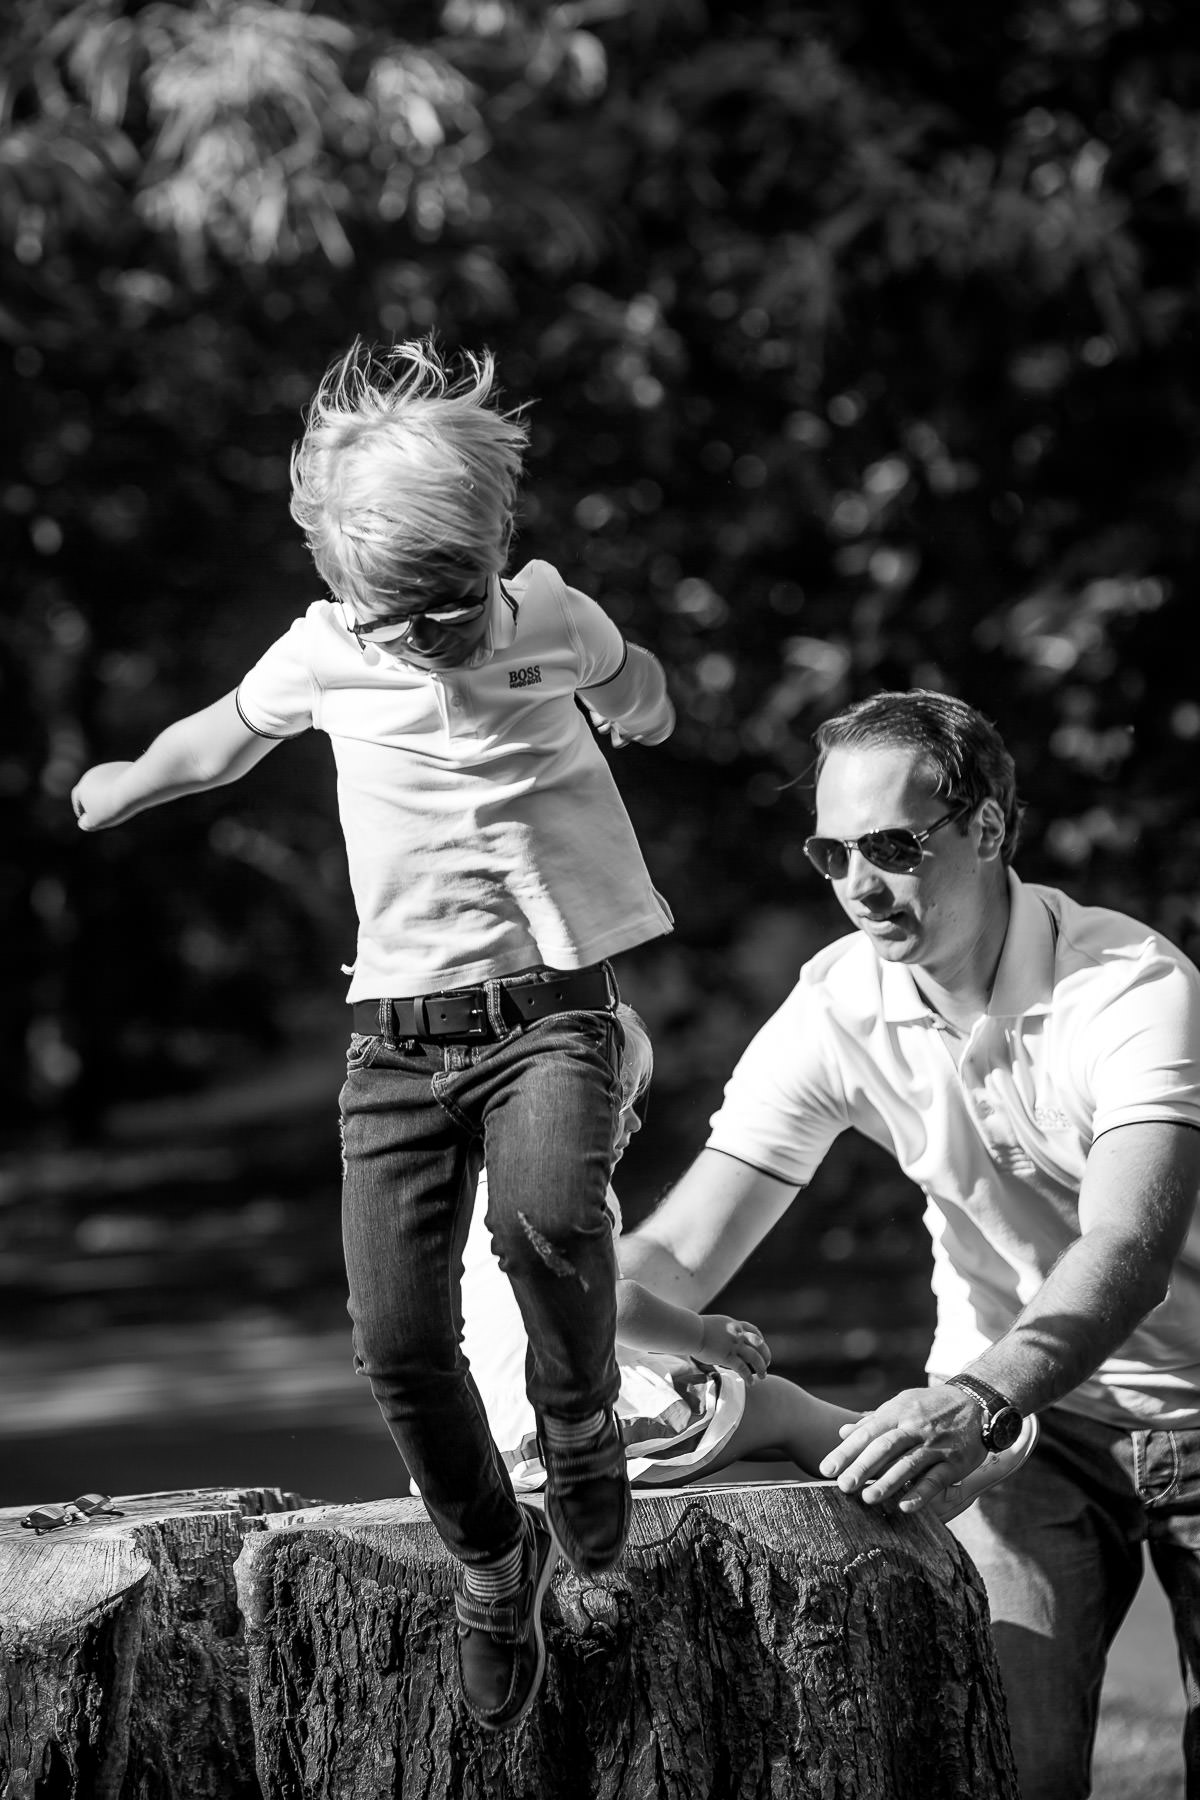 Greenwich Family Photography